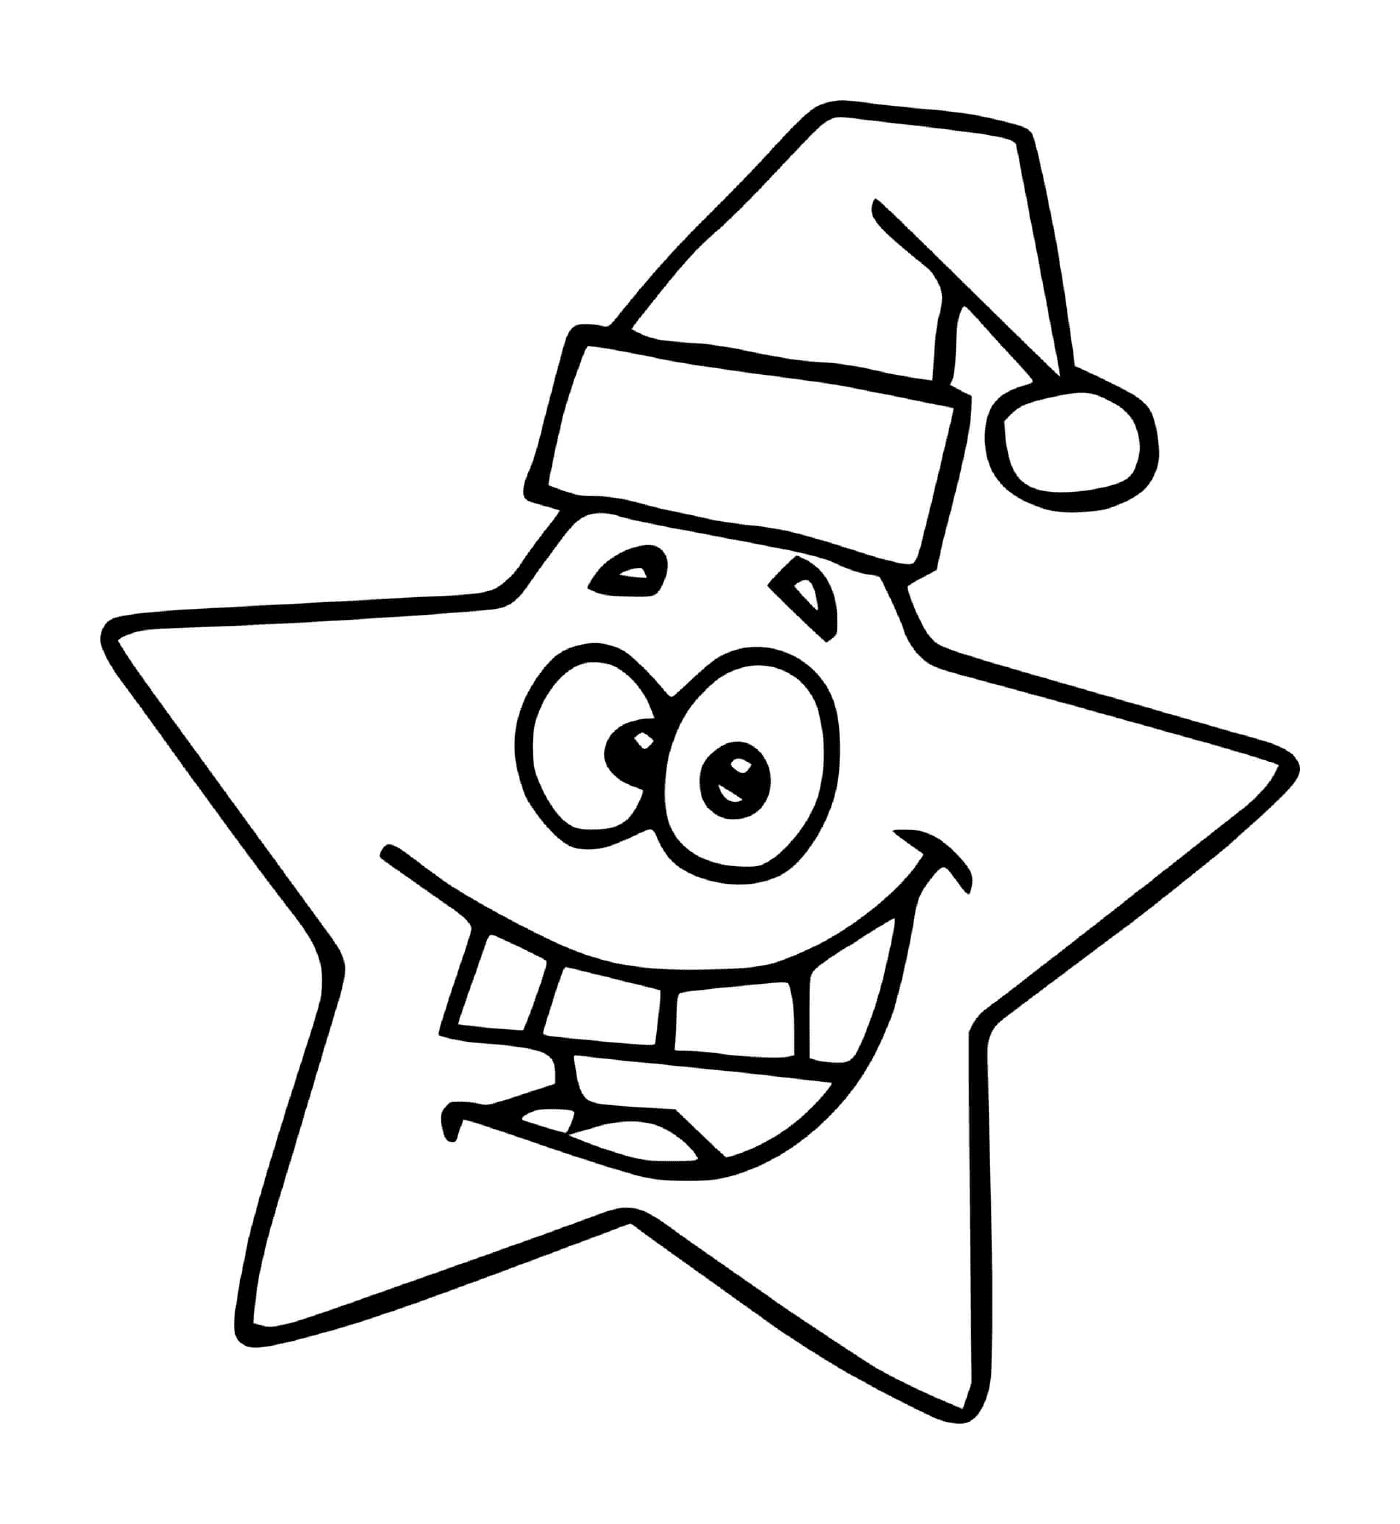  A smiling star with a Christmas hat 